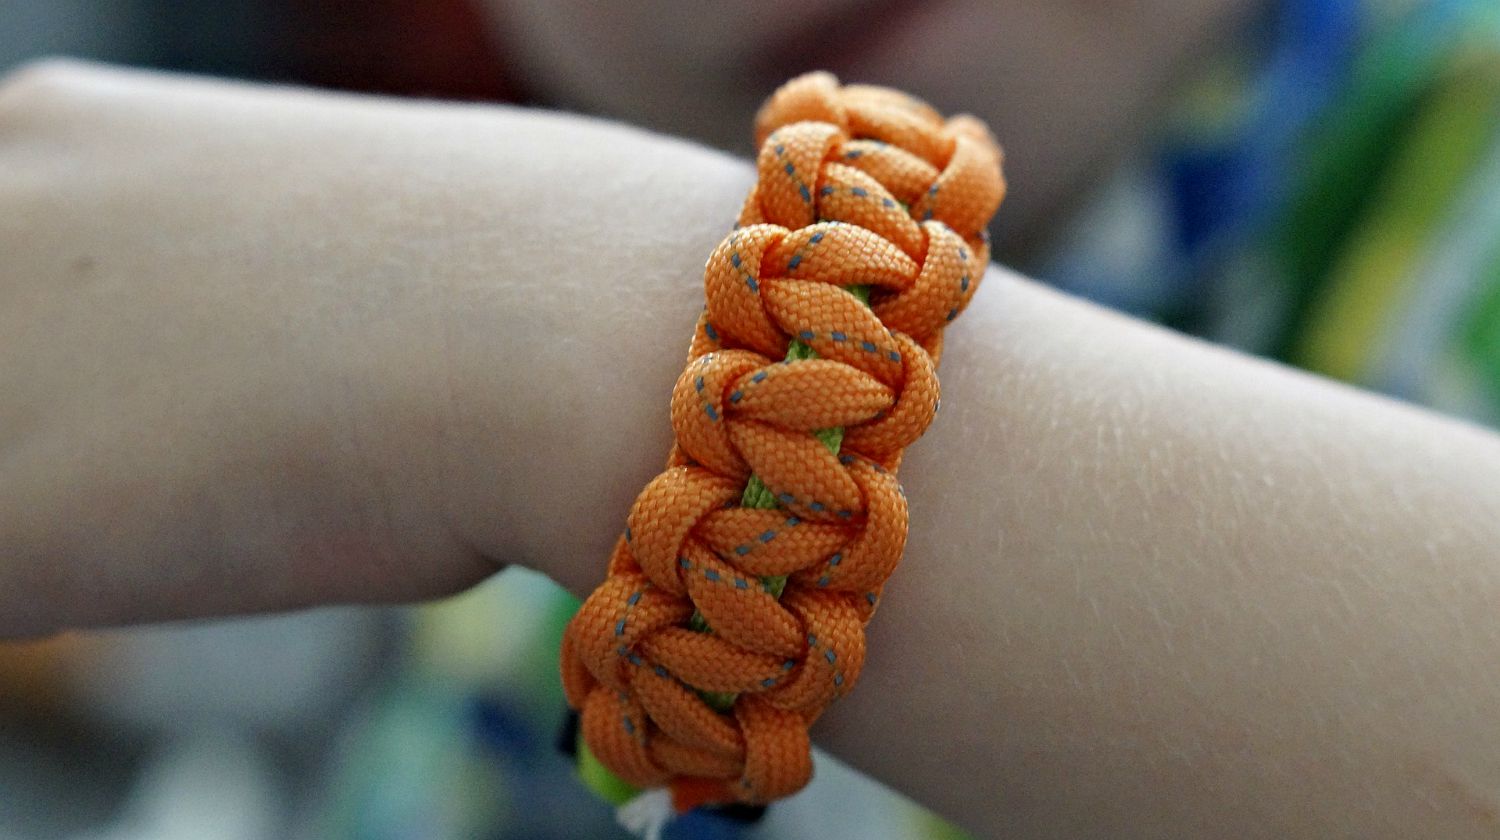 Feature | Orange paracord bracelet | Uses for Paracord That Will Surprise You